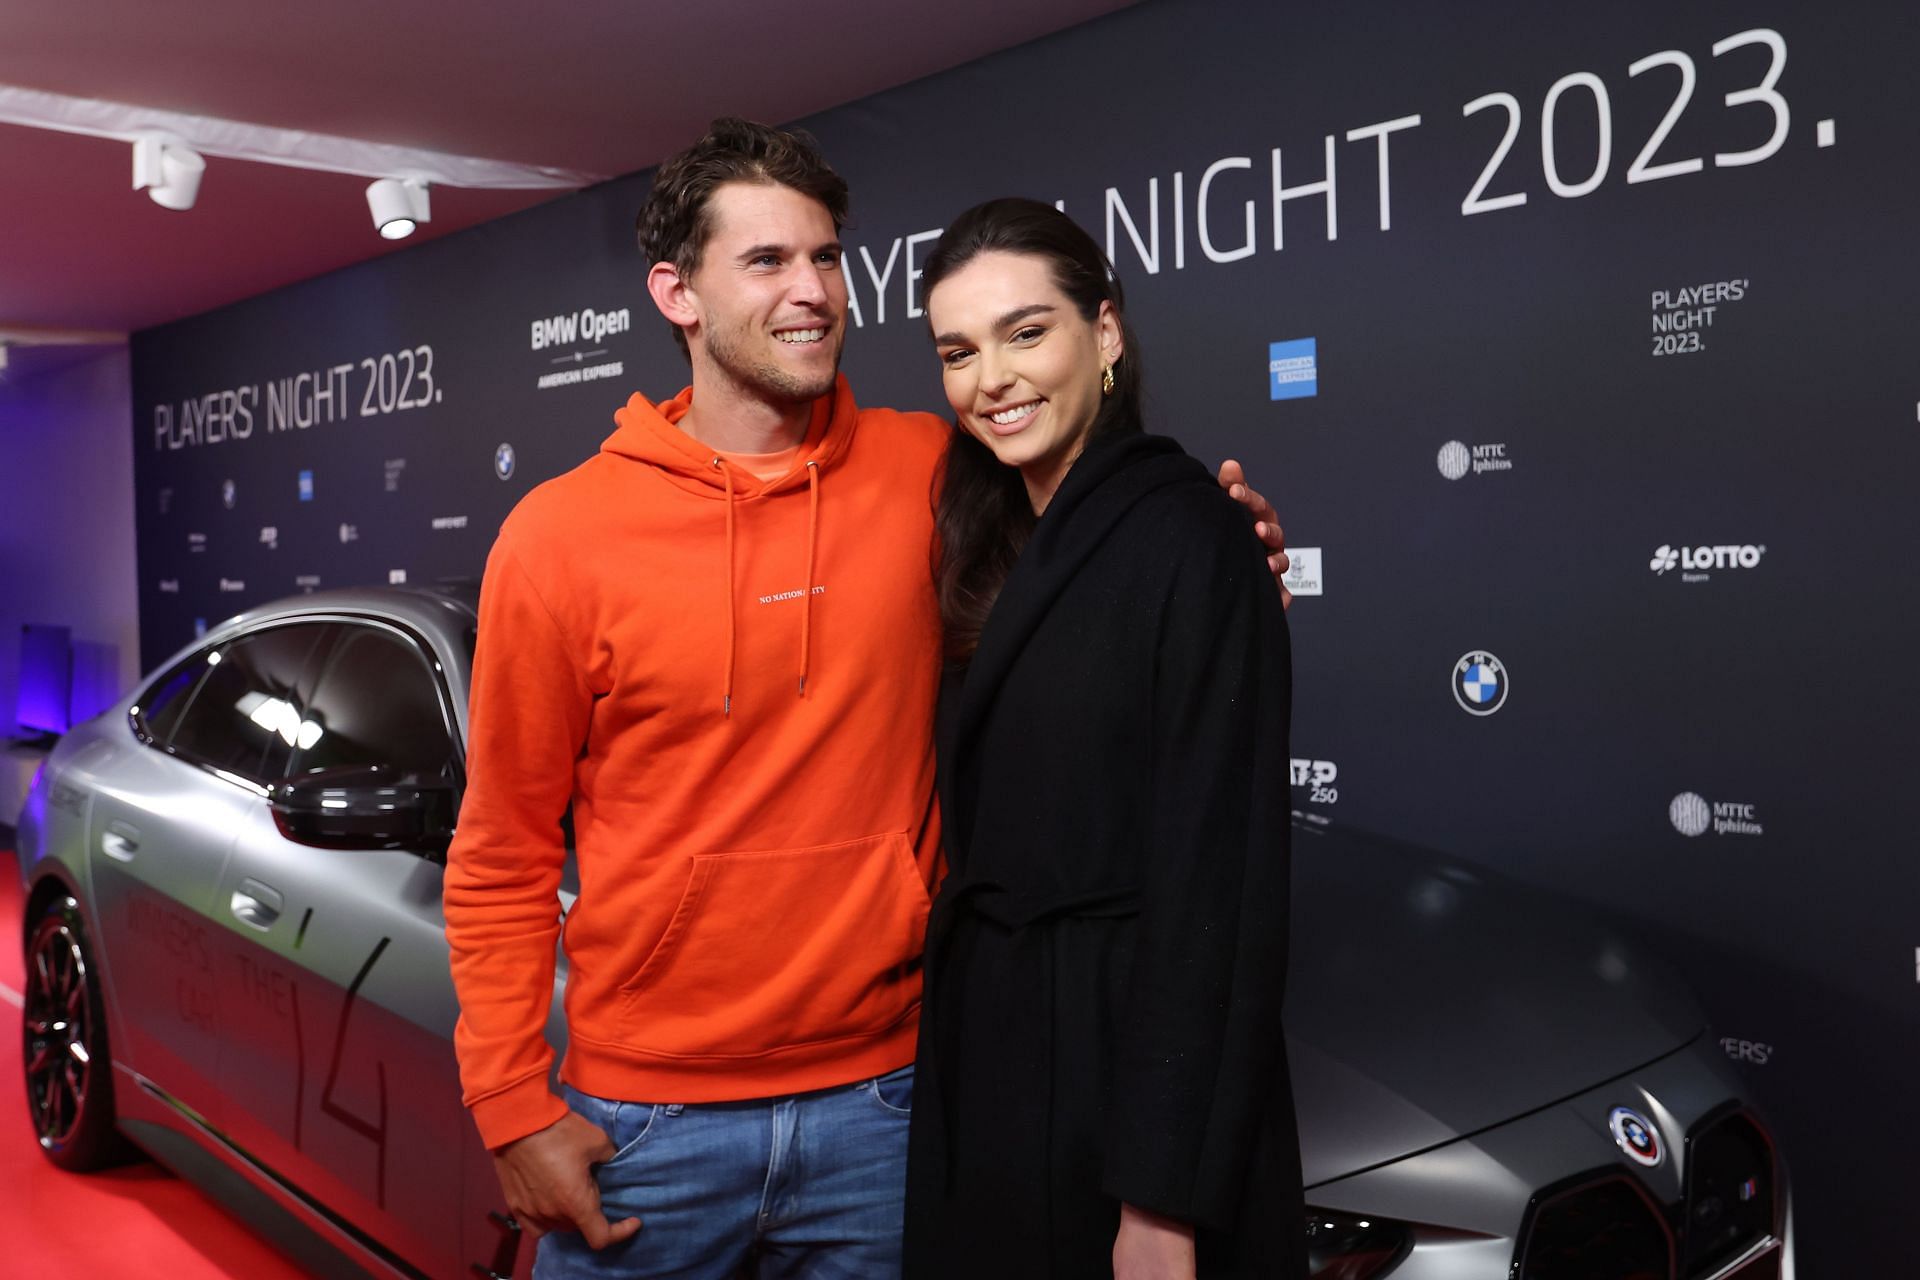 Dominic Thiem arrives with Lilian Paul Roncalli for the BMW Open Players Night 2023.